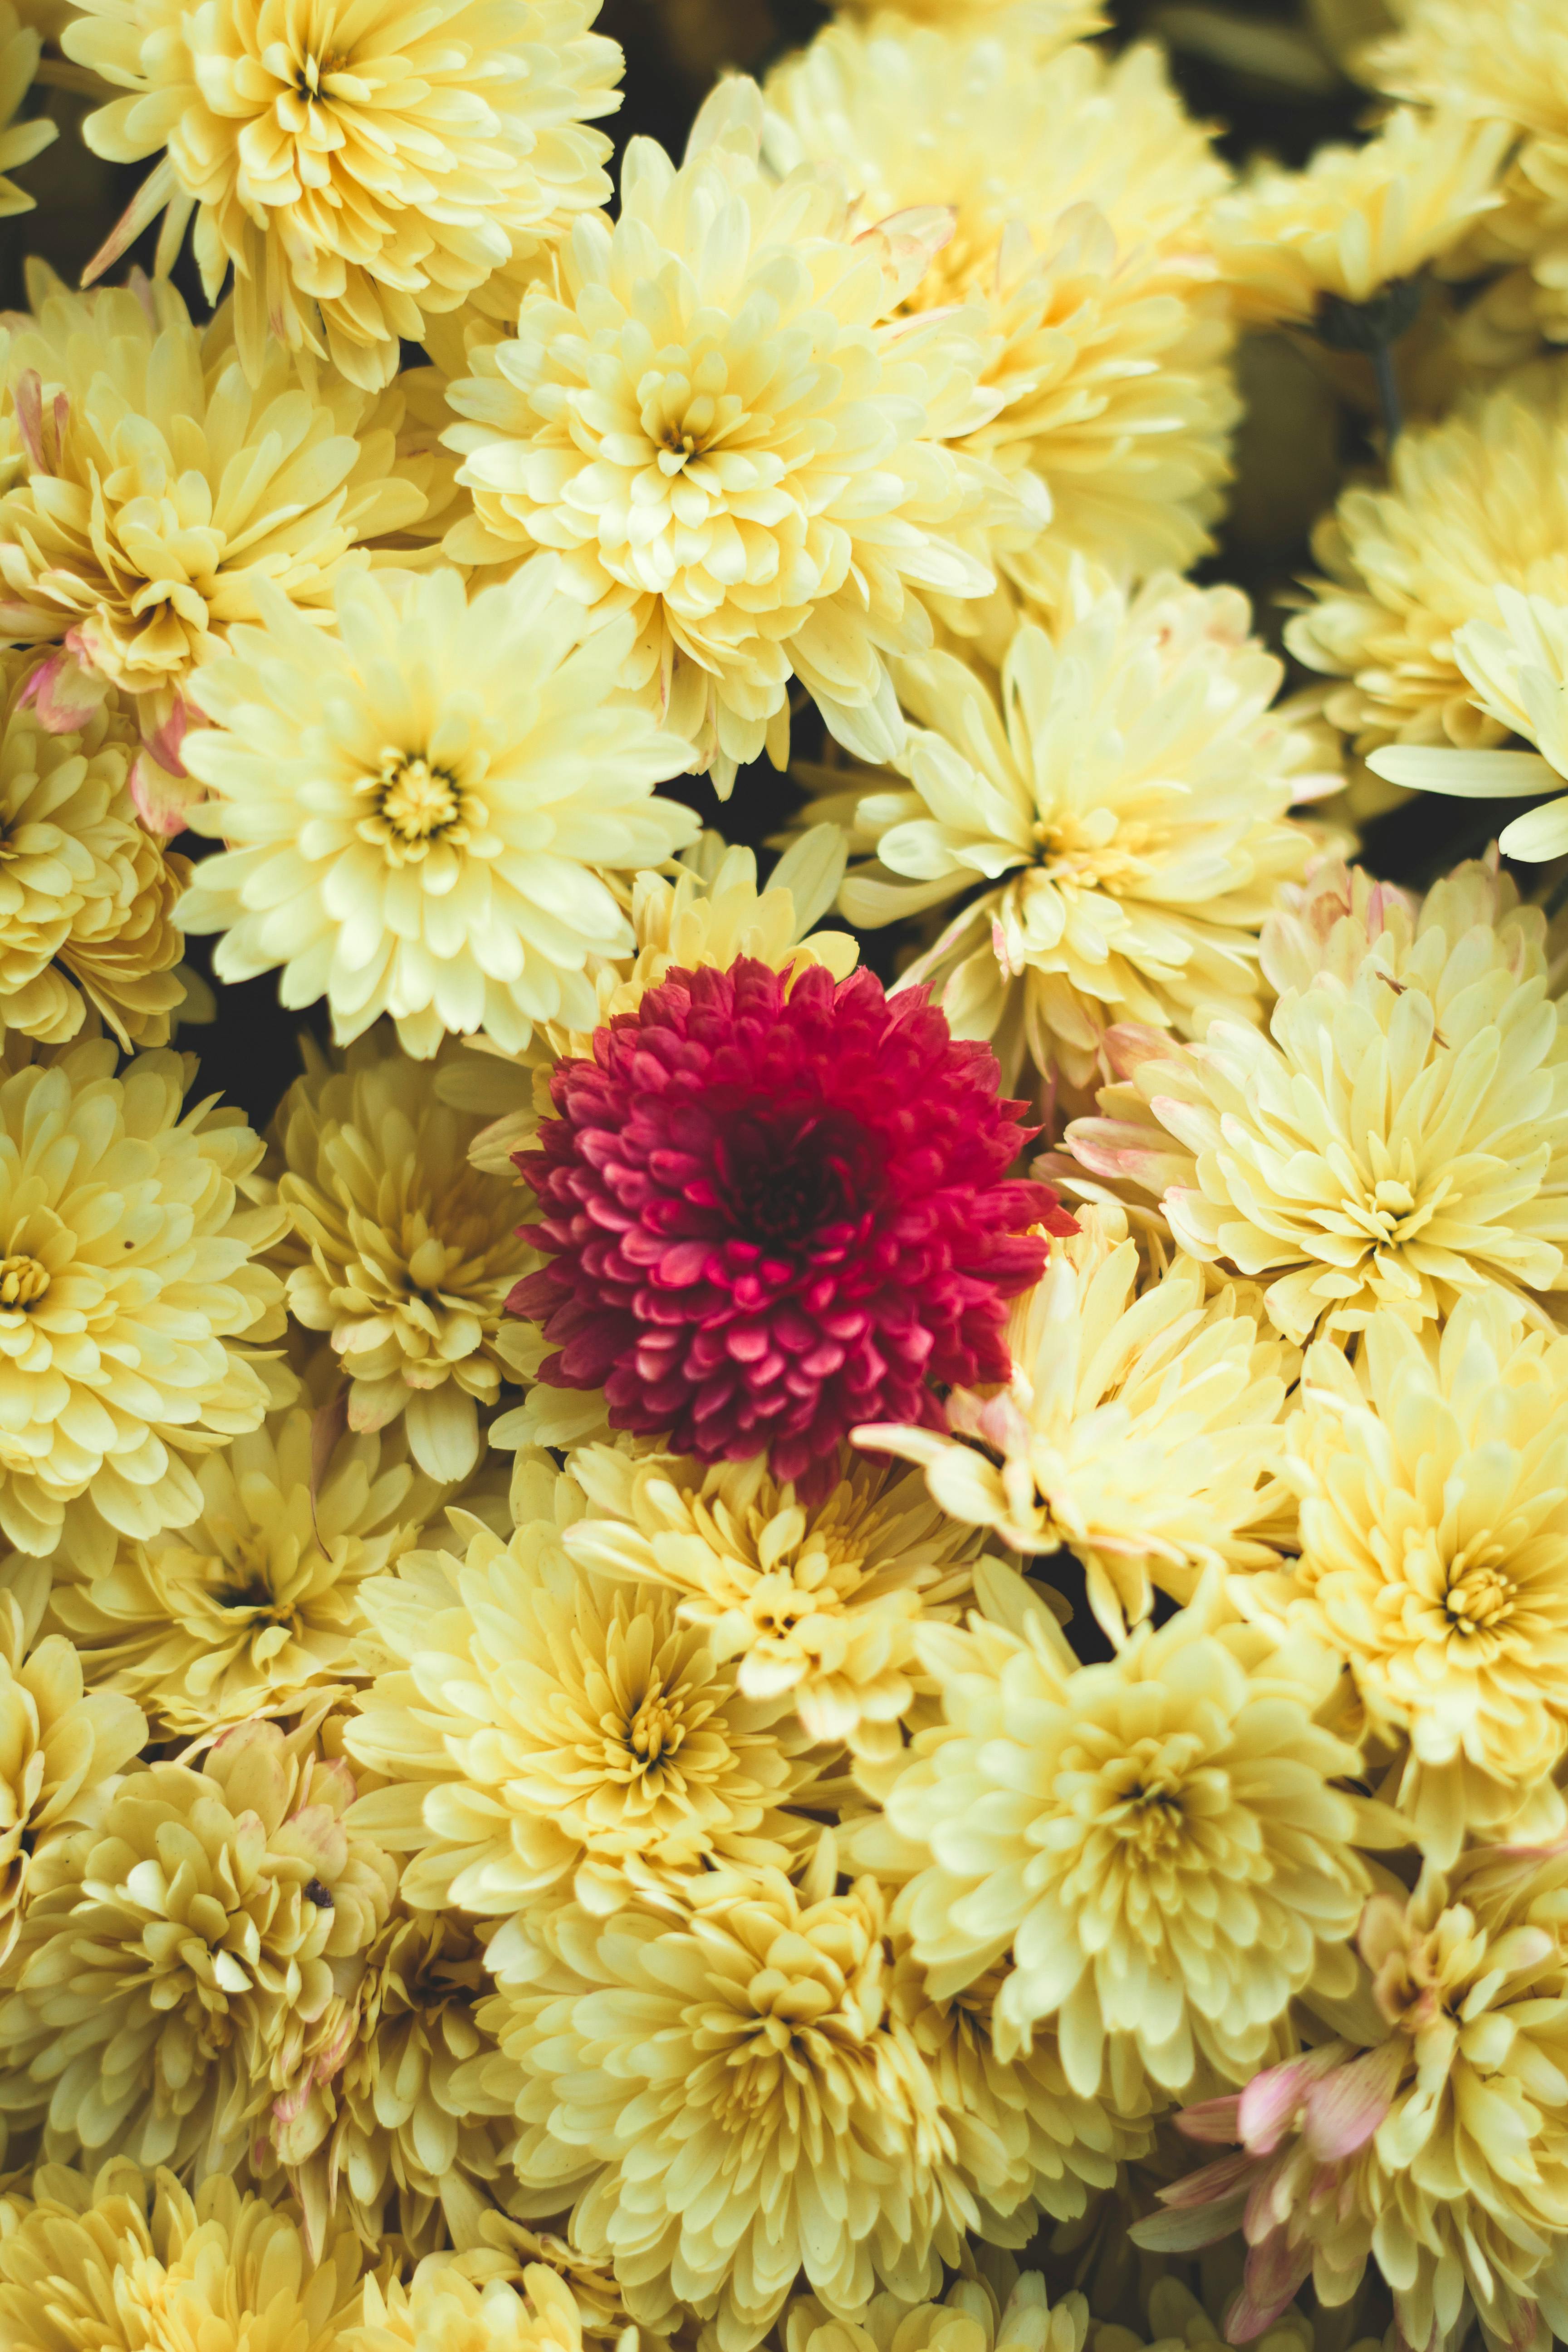 How to Grow and Care for Chrysanthemums